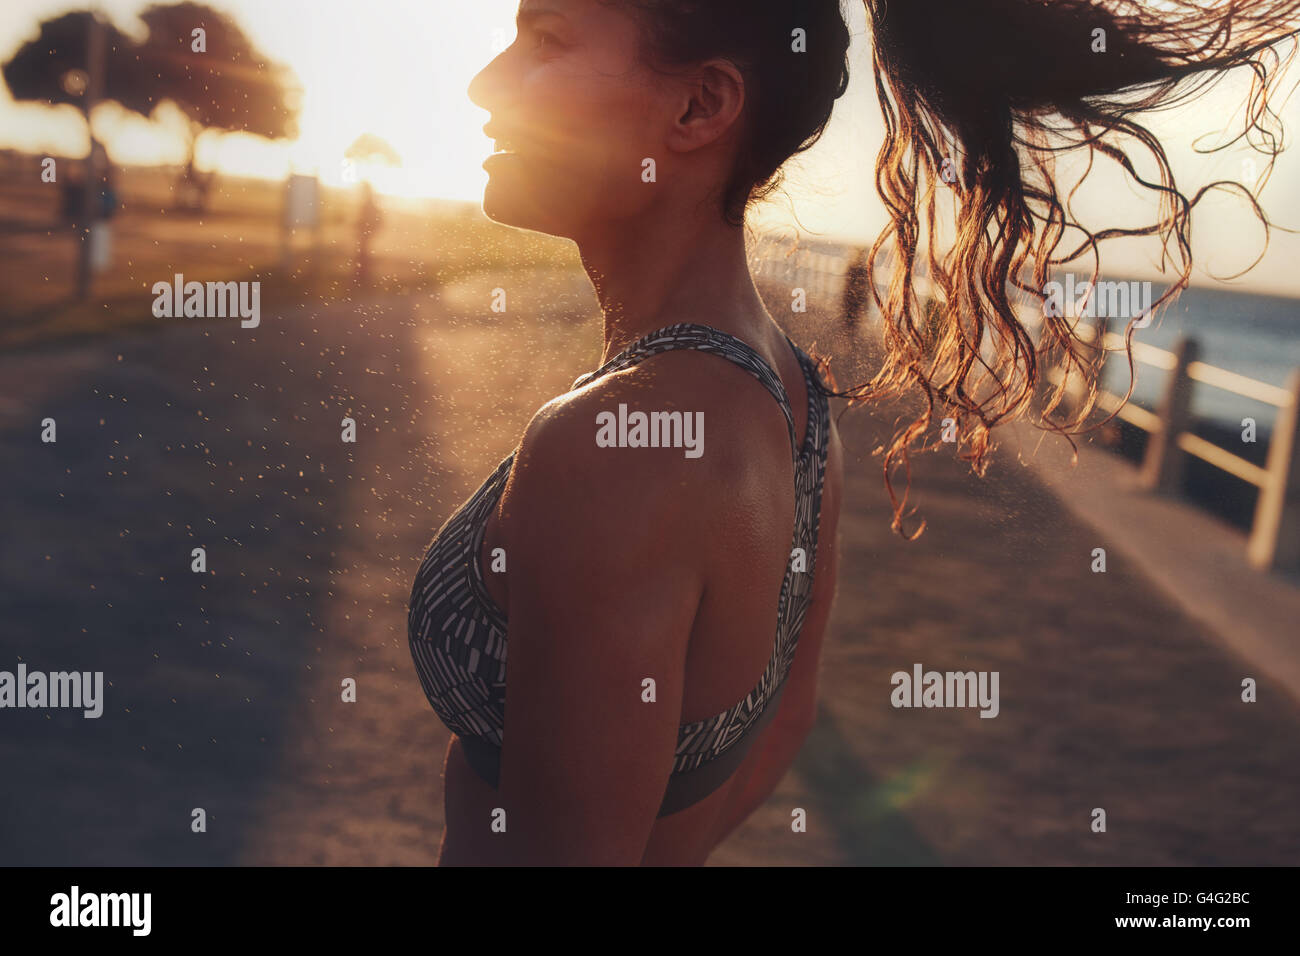 Close up image of fitness woman standing outdoors during evening. She is relaxing after her workout session, with bright sunligh Stock Photo